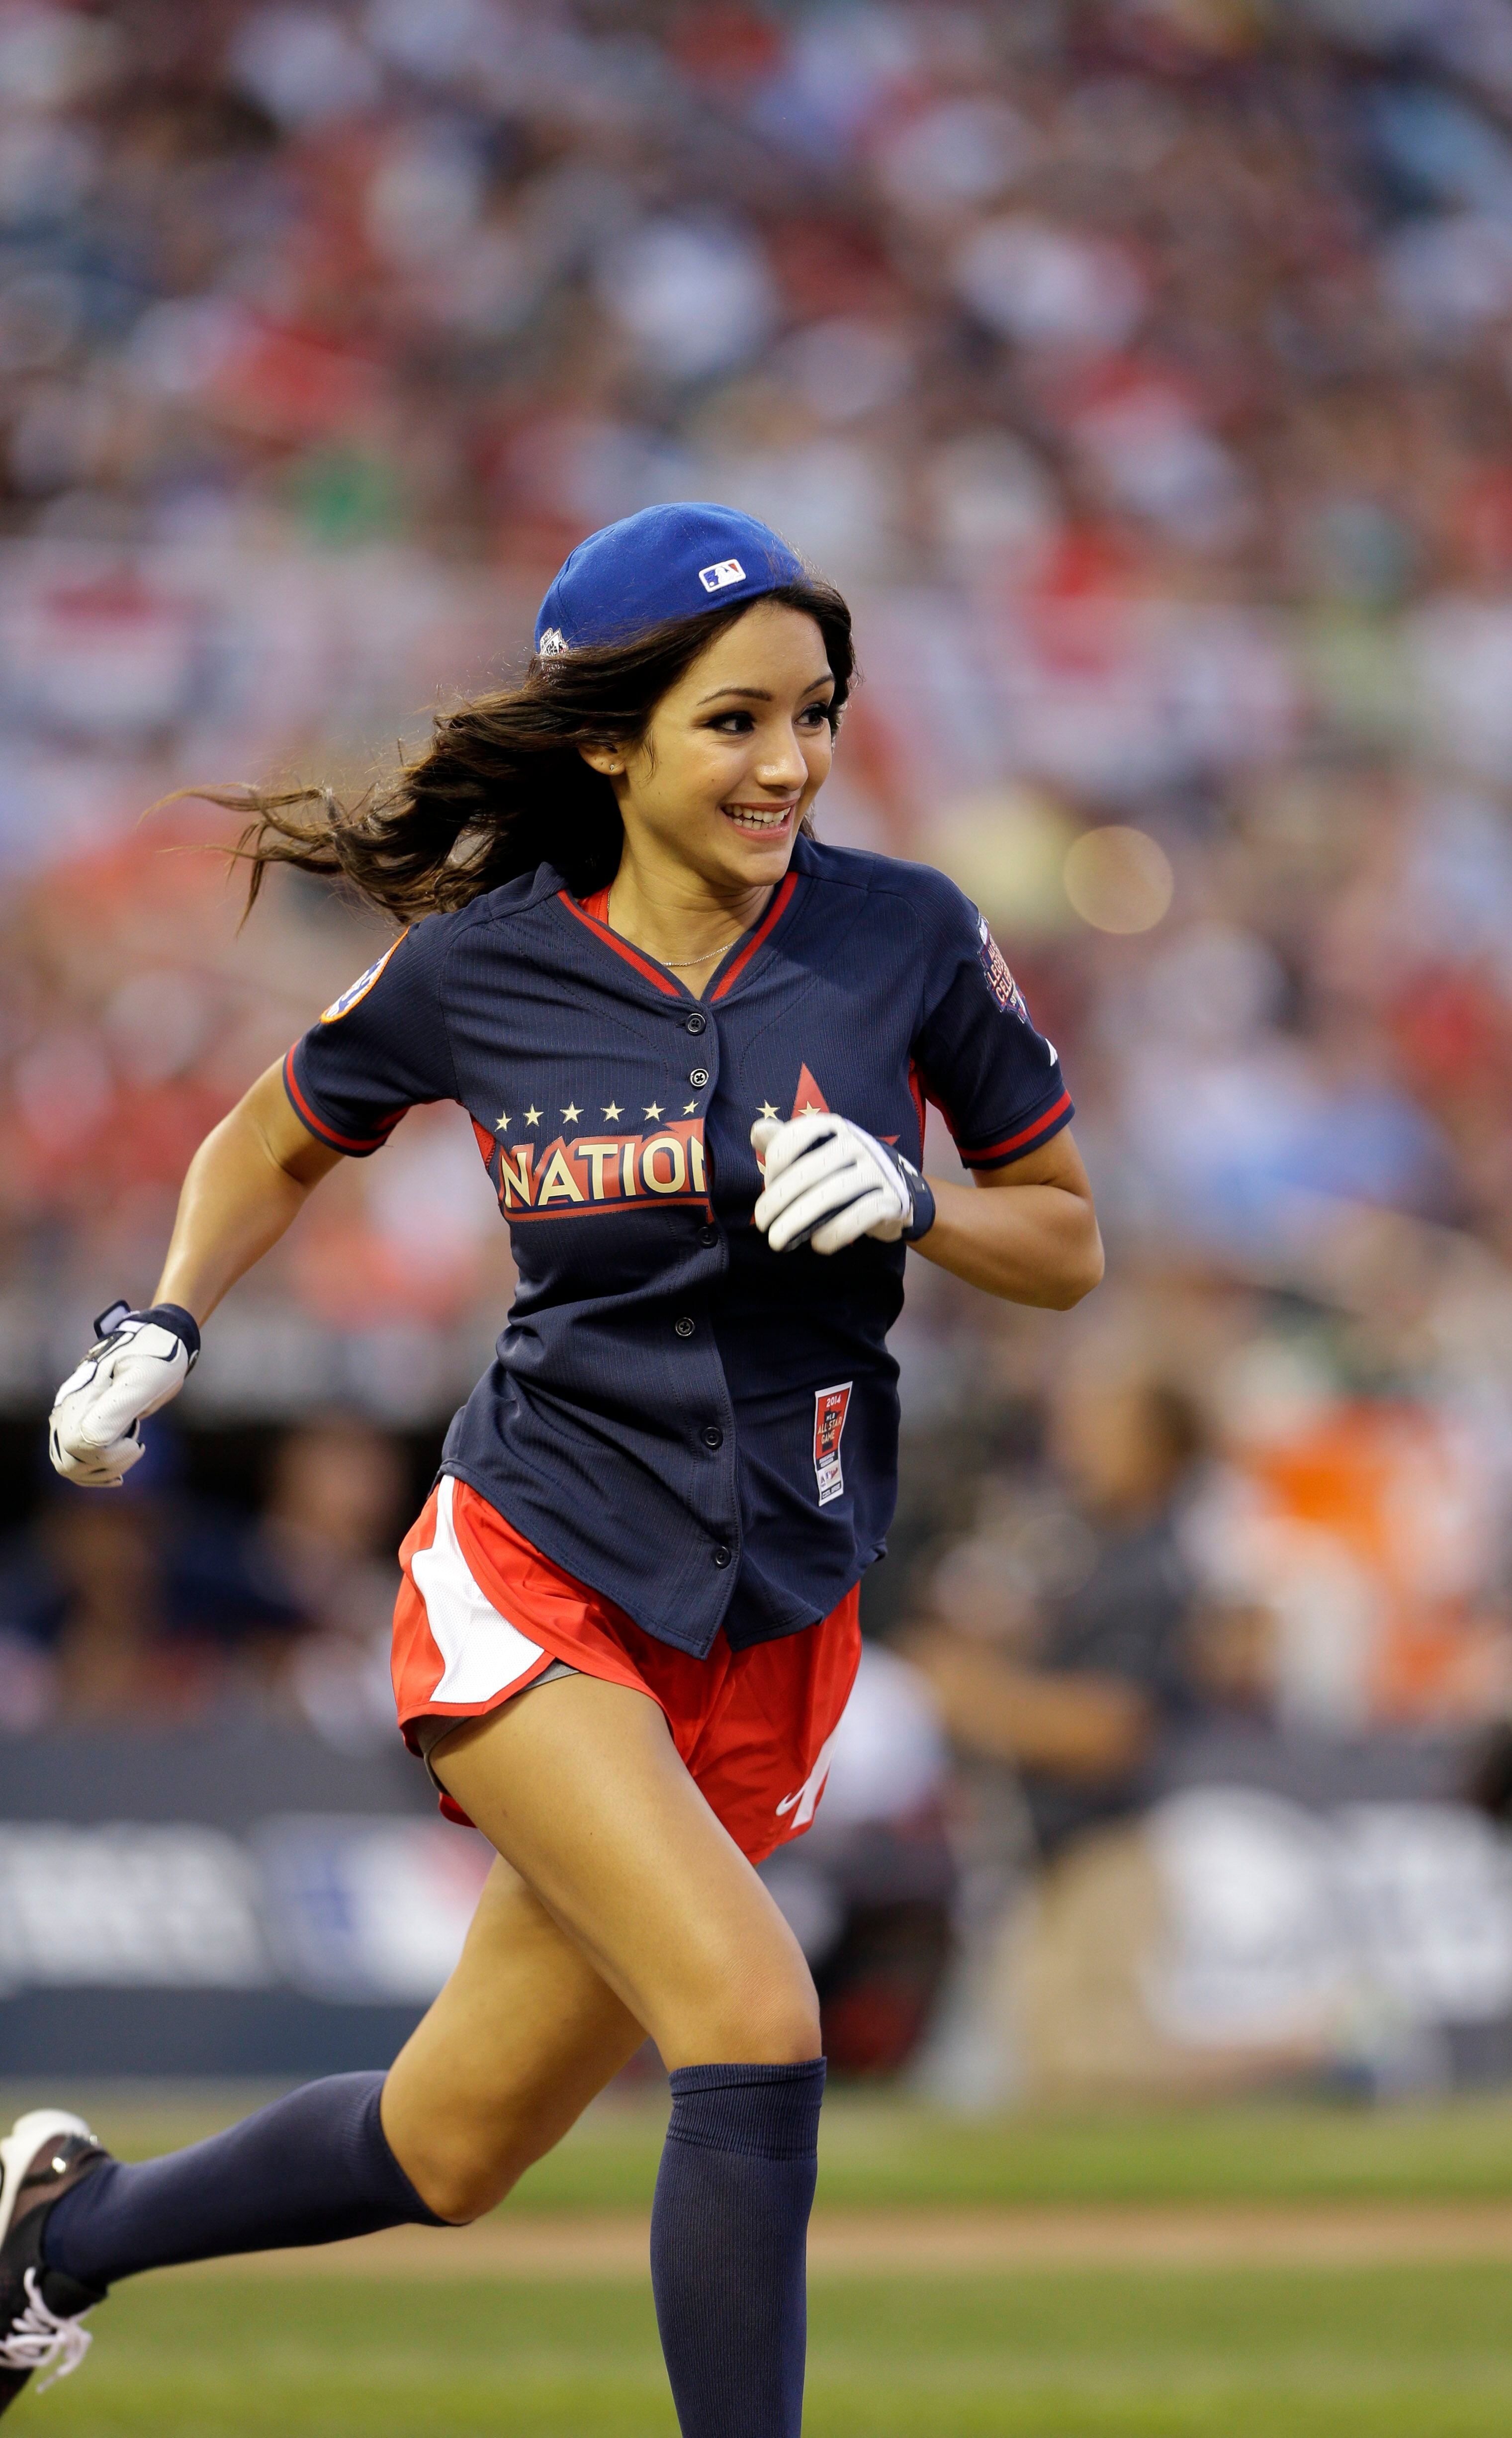 2014 All-Star Legends & Celebrity Softball Game - Sports Illustrated